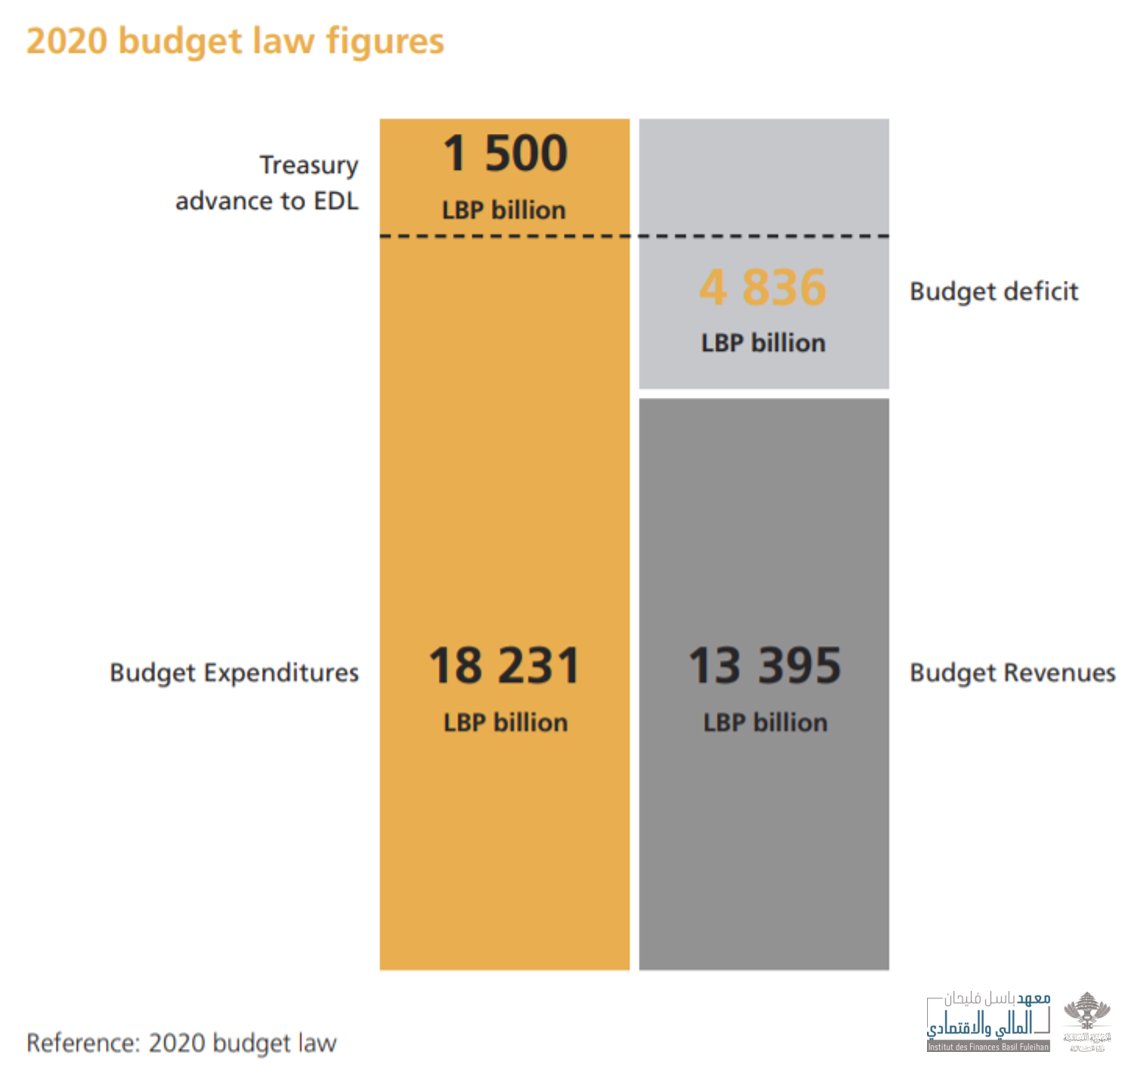 2020 Budget  #Deficit is estimated at LBP 4 836 billion. Adding  #treasury_advance to  #EDL & other treasury  #expenditures increases total expected deficit to LBP 7 672 billion or 8.8% of GDP*.*Based of the GDP estimates included in the 2020 pre-budget statement.